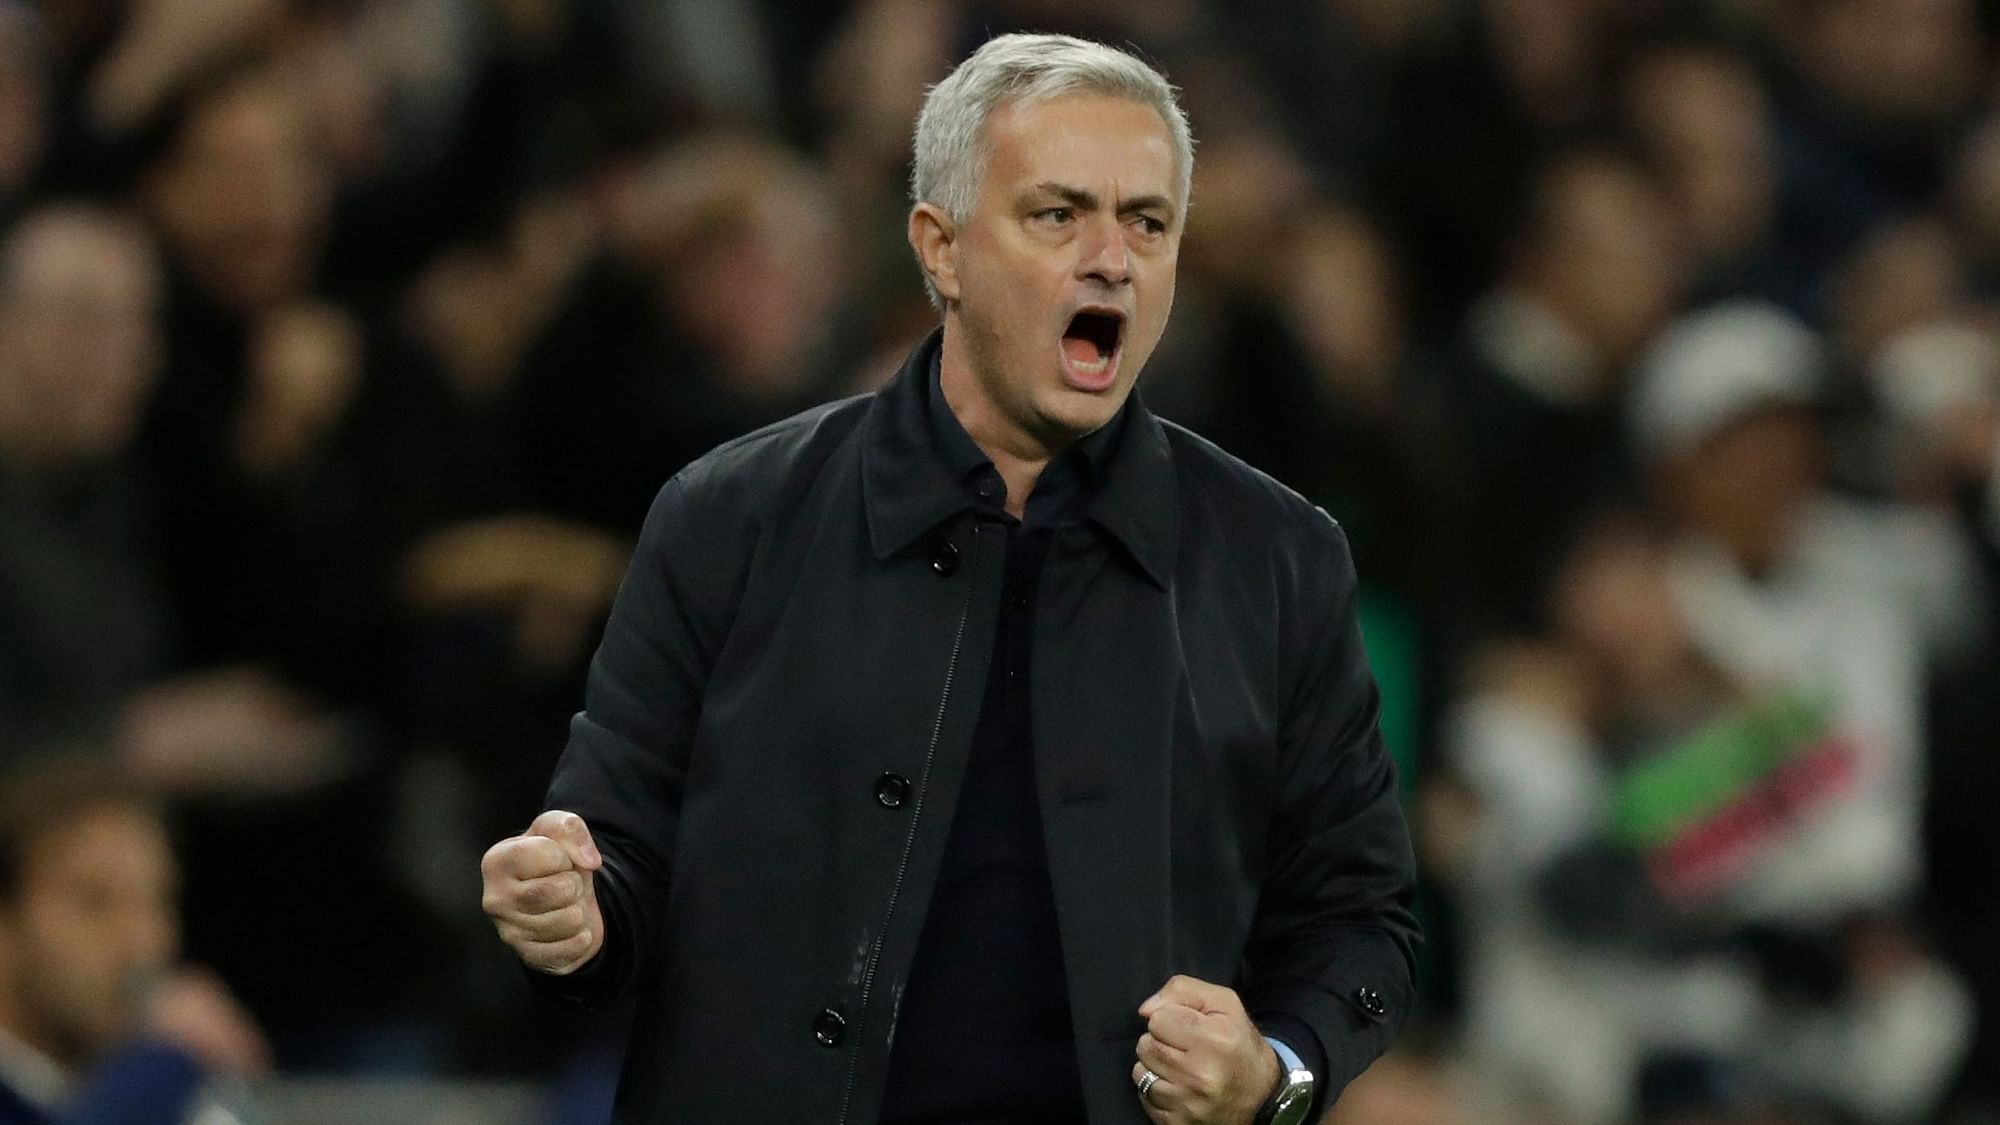 Tottenham’s manager Jose Mourinho celebrates his team second goal during the Champions League Group B match between Tottenham Hotspur and Olympiakos at the Tottenham Hotspur Stadium in London,